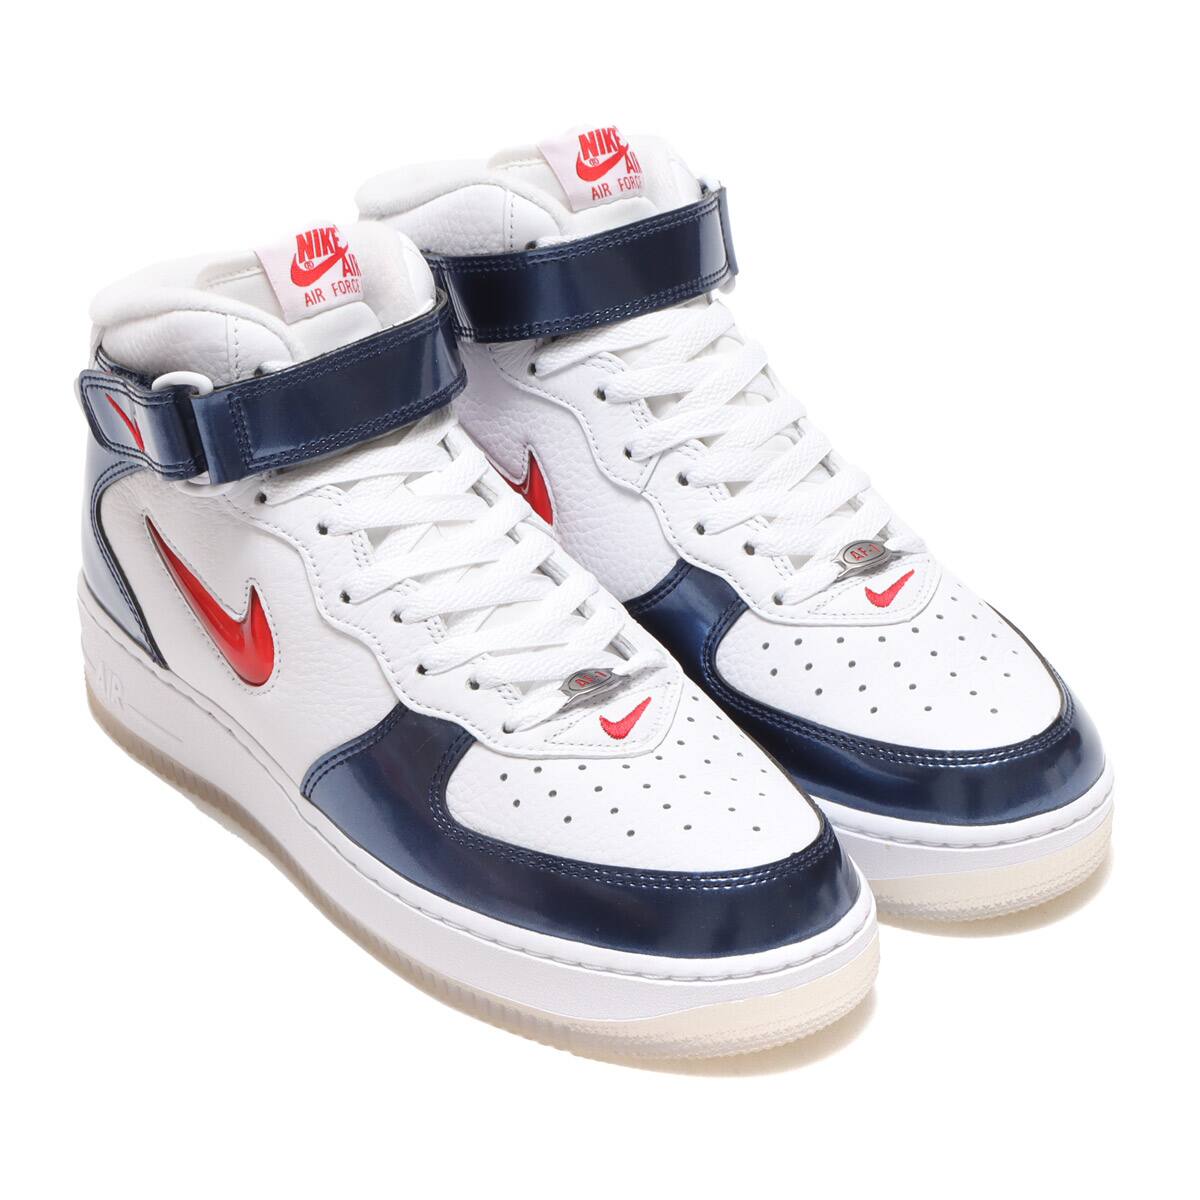 NIKE AIR FORCE 1 MID QS WHITE/UNIVERSITY RED-MIDNIGHT NAVY-WHITE ...